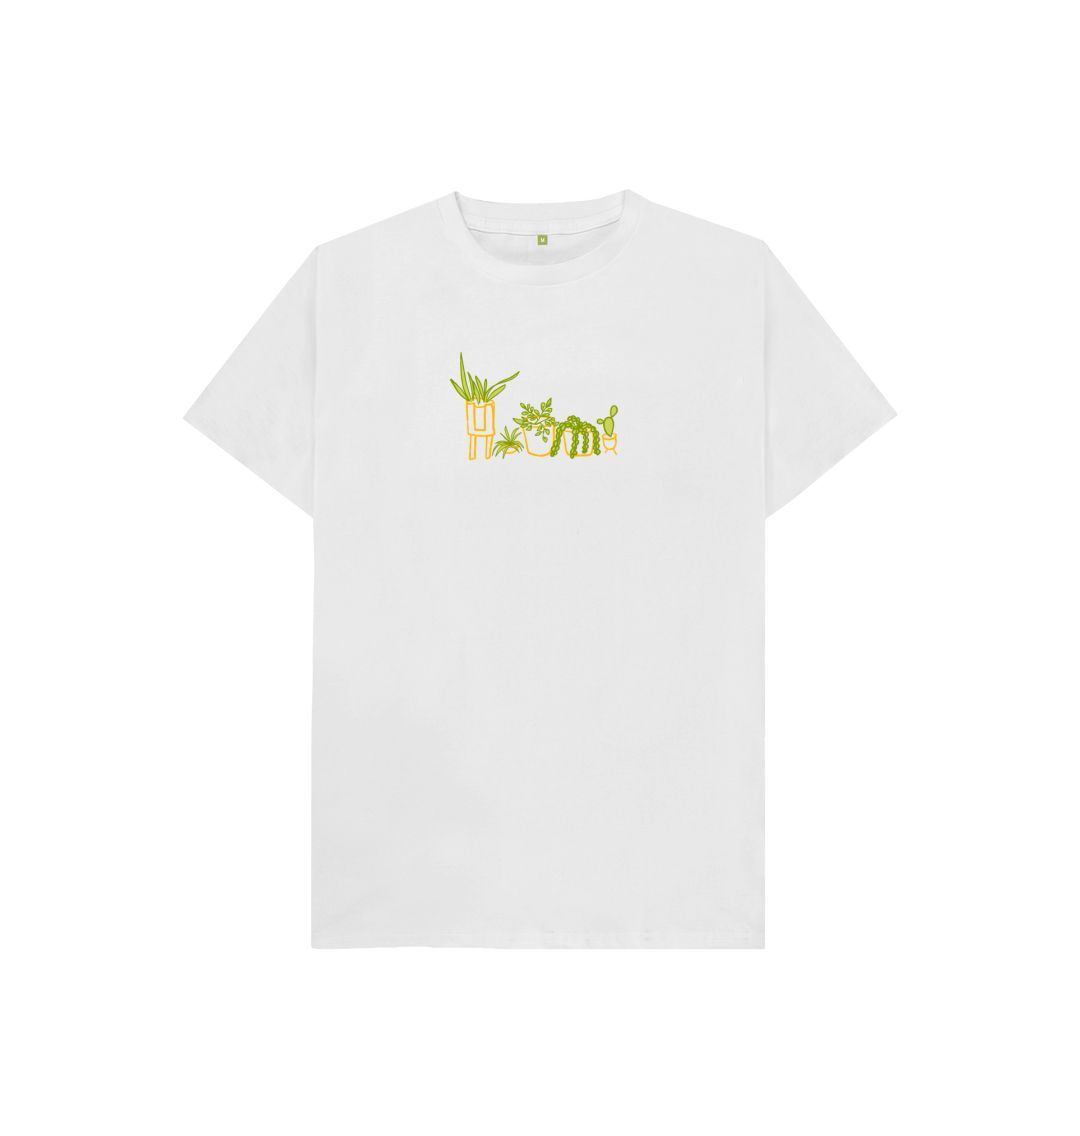 White Plant Love T-Shirt (Kids - Assorted Colors)